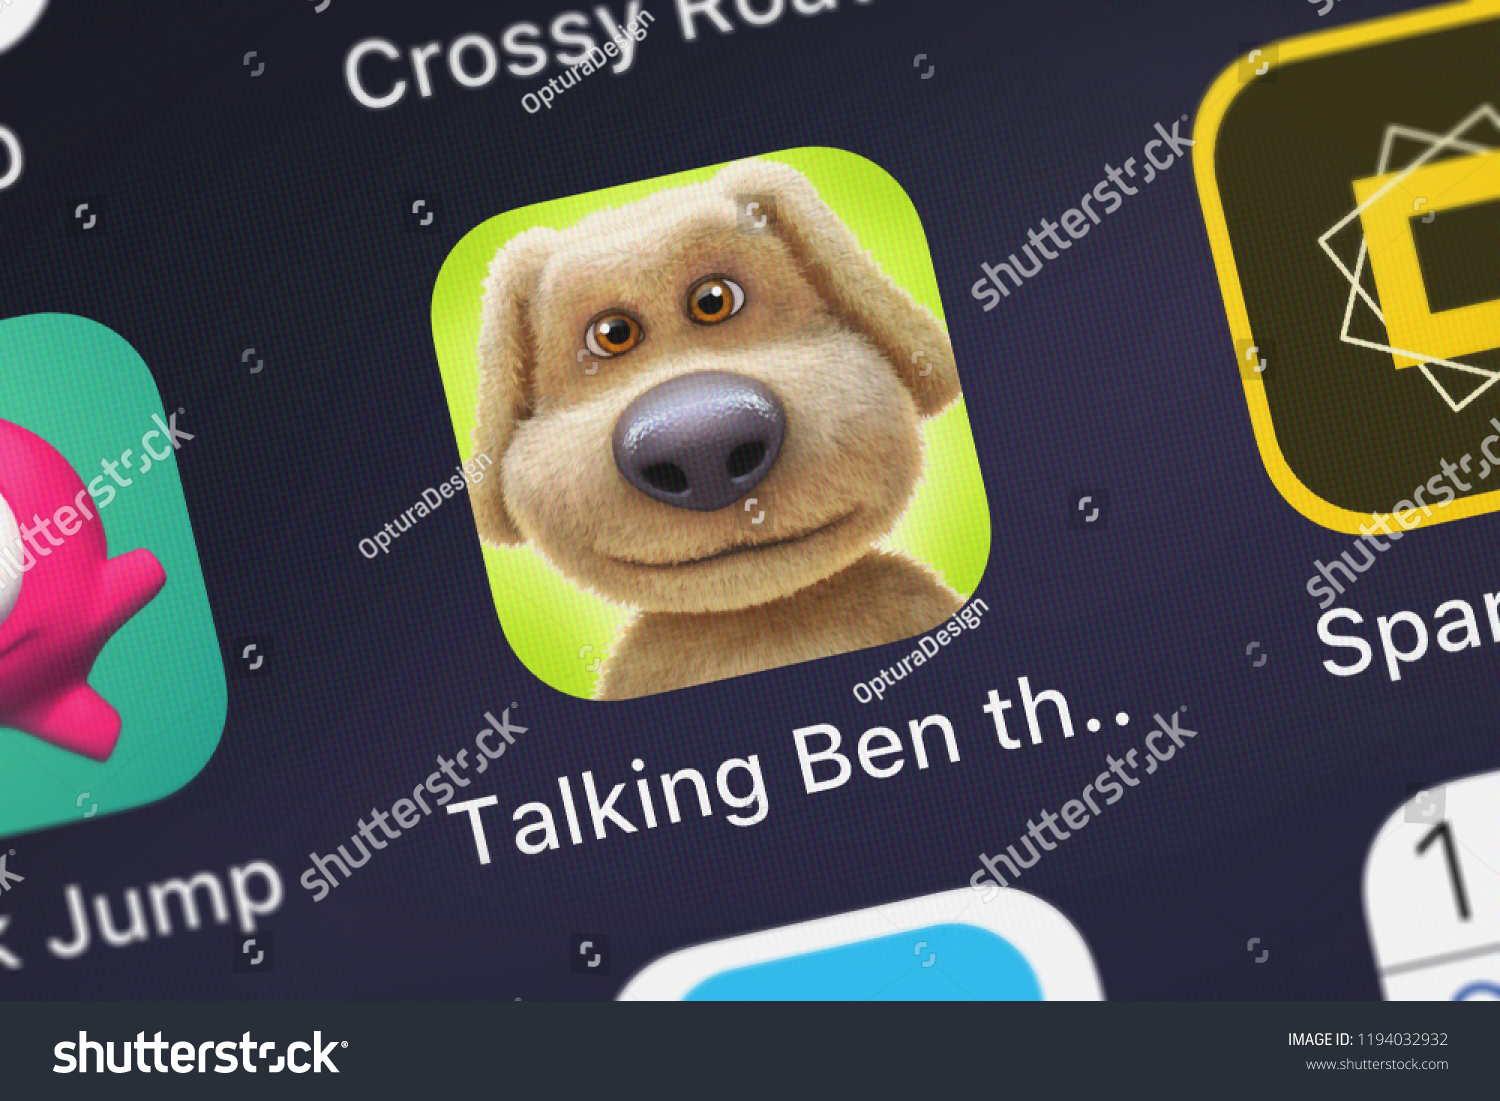 Download Talking Ben the Dog for PCTalking Ben the Dog on PC  Andy   Android Emulator for PC  Mac